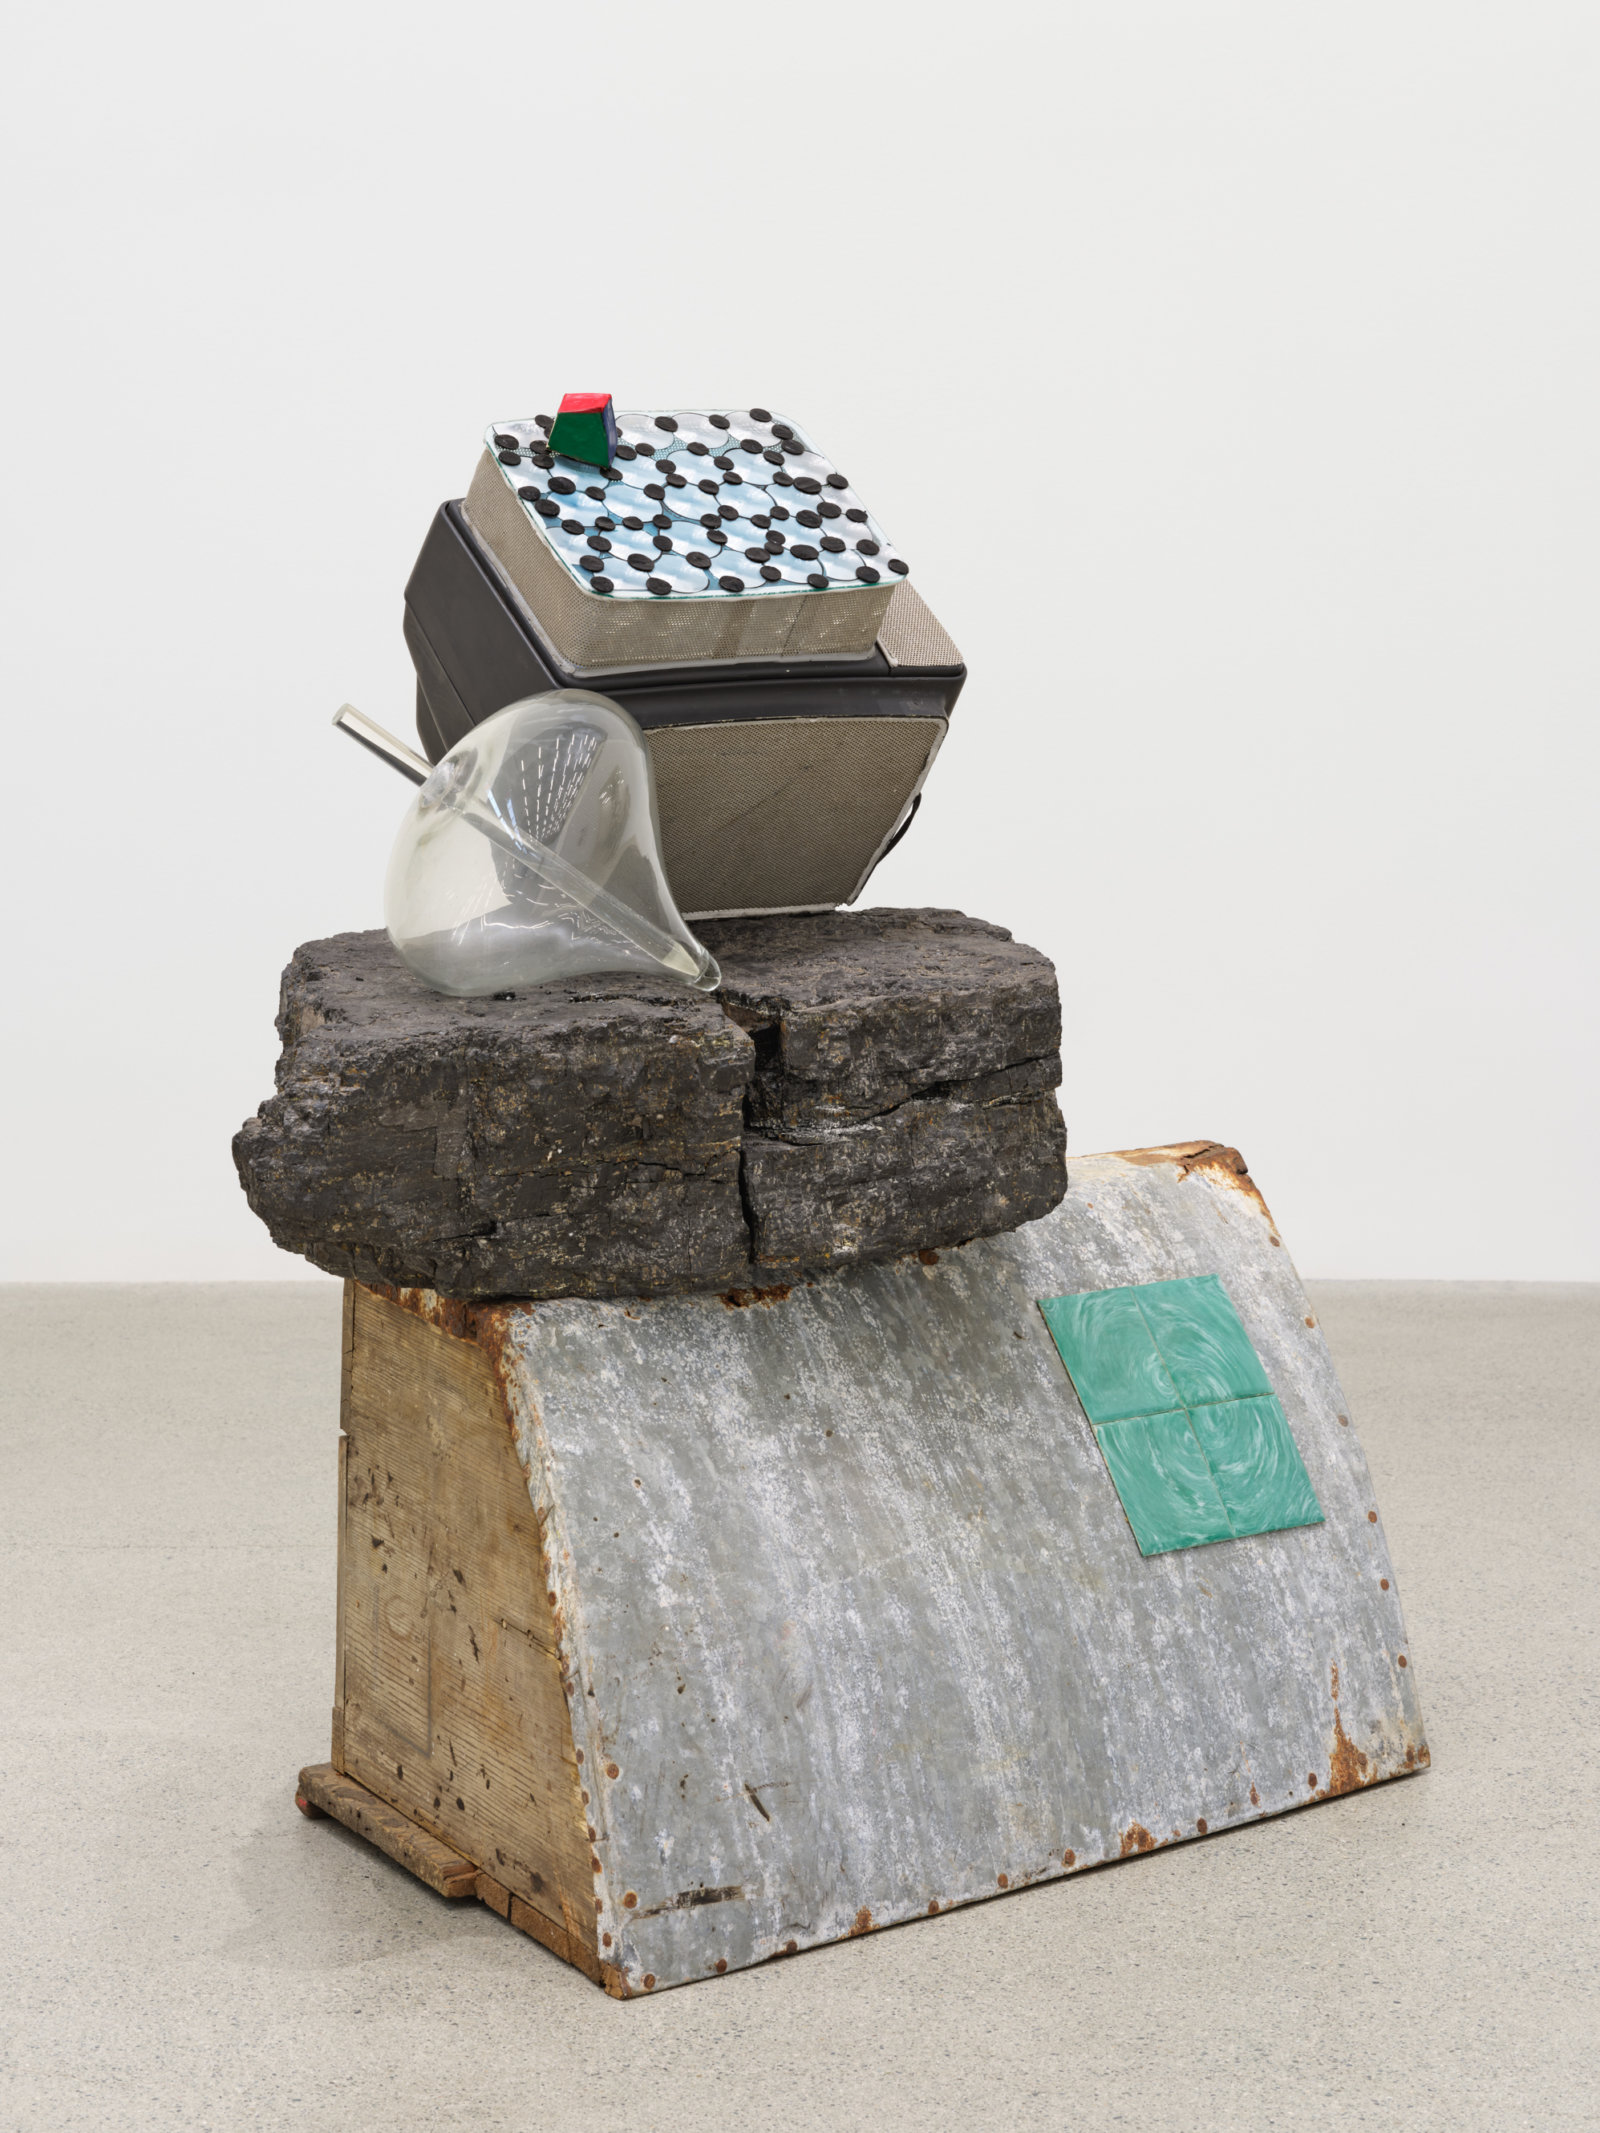 Jerry Pethick, Floating Free, 1972–1993, wood, galvanized metal, plastic, coal, TV, duratrans, blown glass, lenses, aluminum, tiles, silicone, 43 x 27 x 42 in. (109 x 67 x 105 cm)